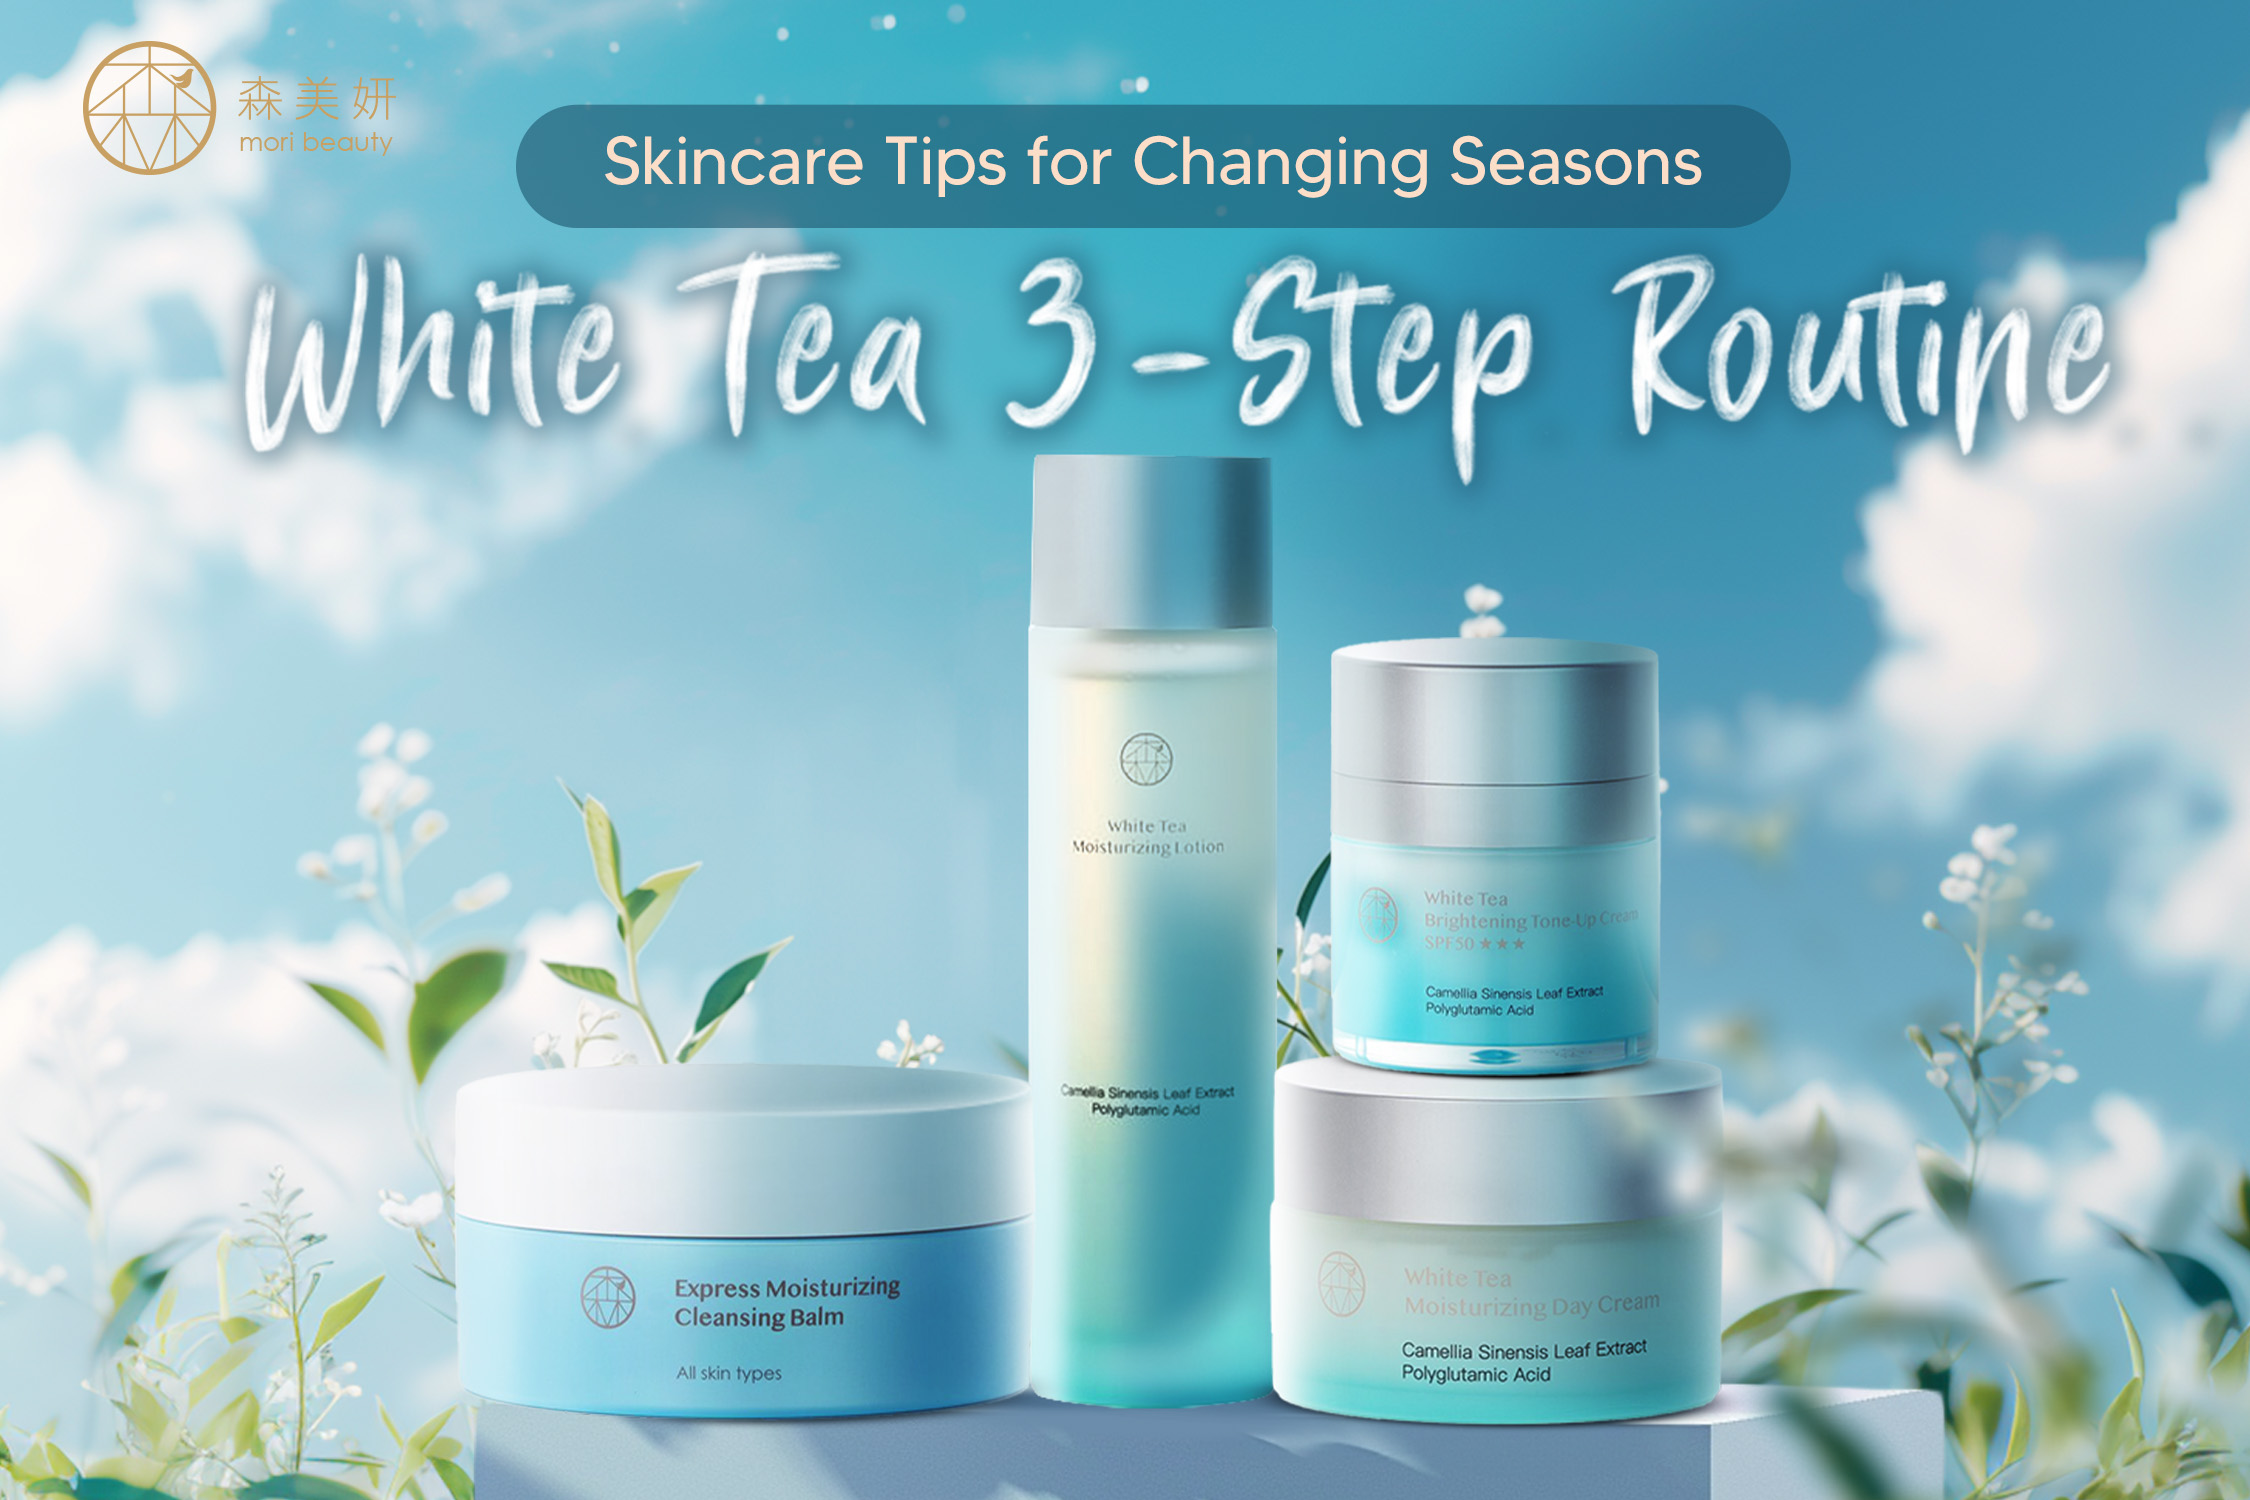 Essential for sensitive skin during seasonal transitions! White Tea 3-Step Routine!  